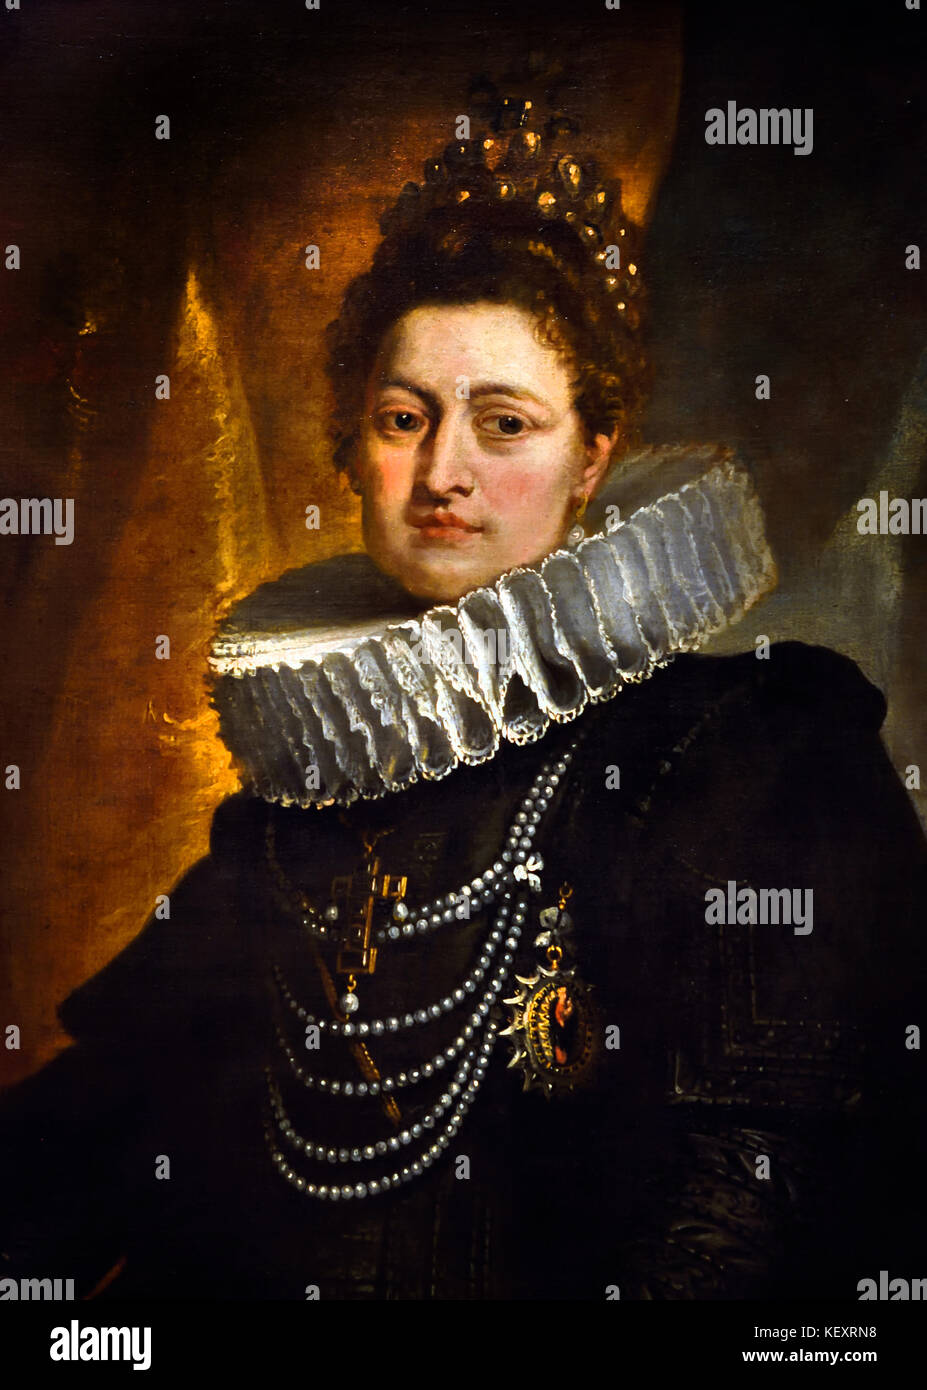 Isabella Clara Eugenia 1566 – 1633 sovereign of the Spanish Netherlands and the north of modern France, Husband Albert VII, Archduke of Austria. ( Clara Isabella Eugenia was an infanta of Spain and Portugal ) Peter Paul Rubens (1577–1640) Painter in the Flemish Baroque tradition .Antwerp, Antwerpen, Belgium, Stock Photo